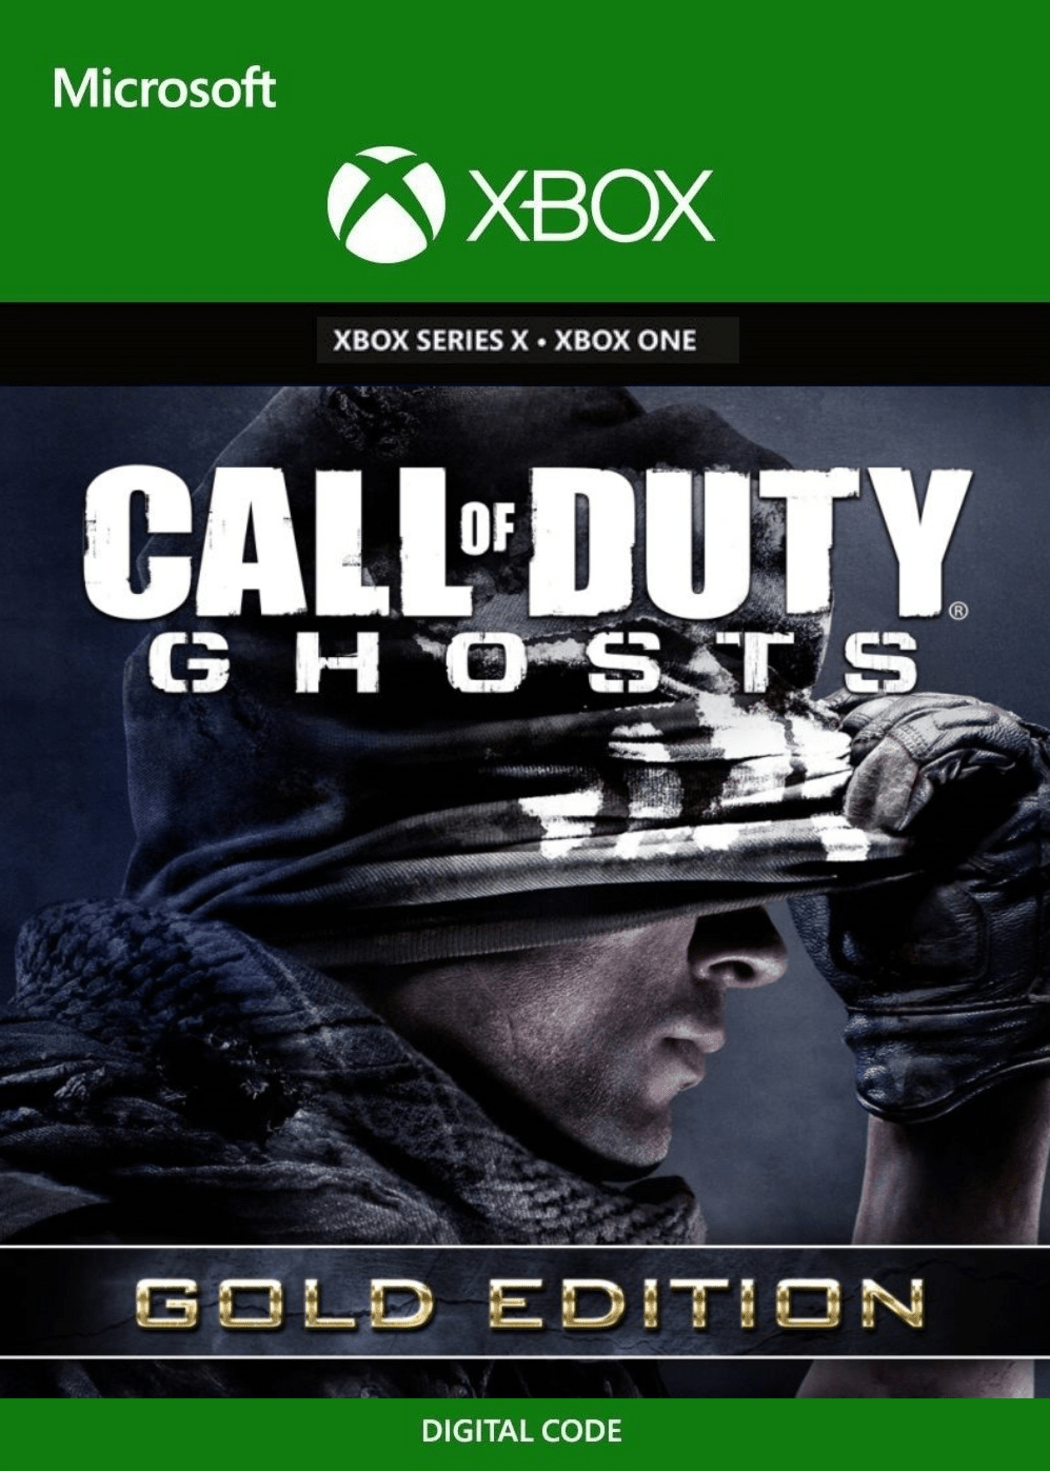 Call of Duty Ghosts Gold Edition Xbox One X